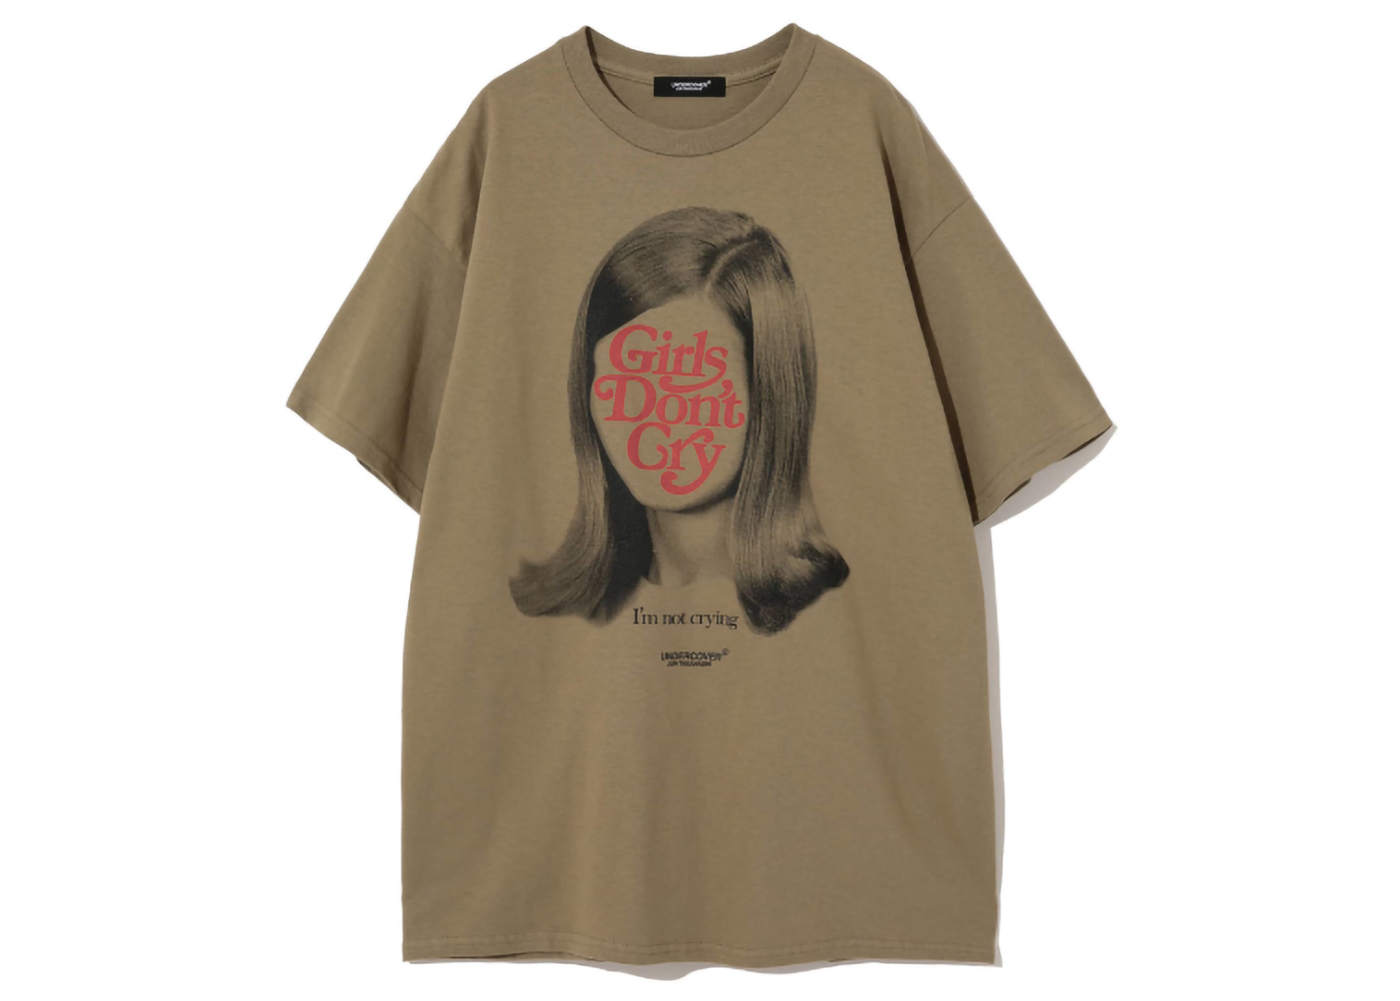 VERDY Undercover tee Girls Don't Cry 白M